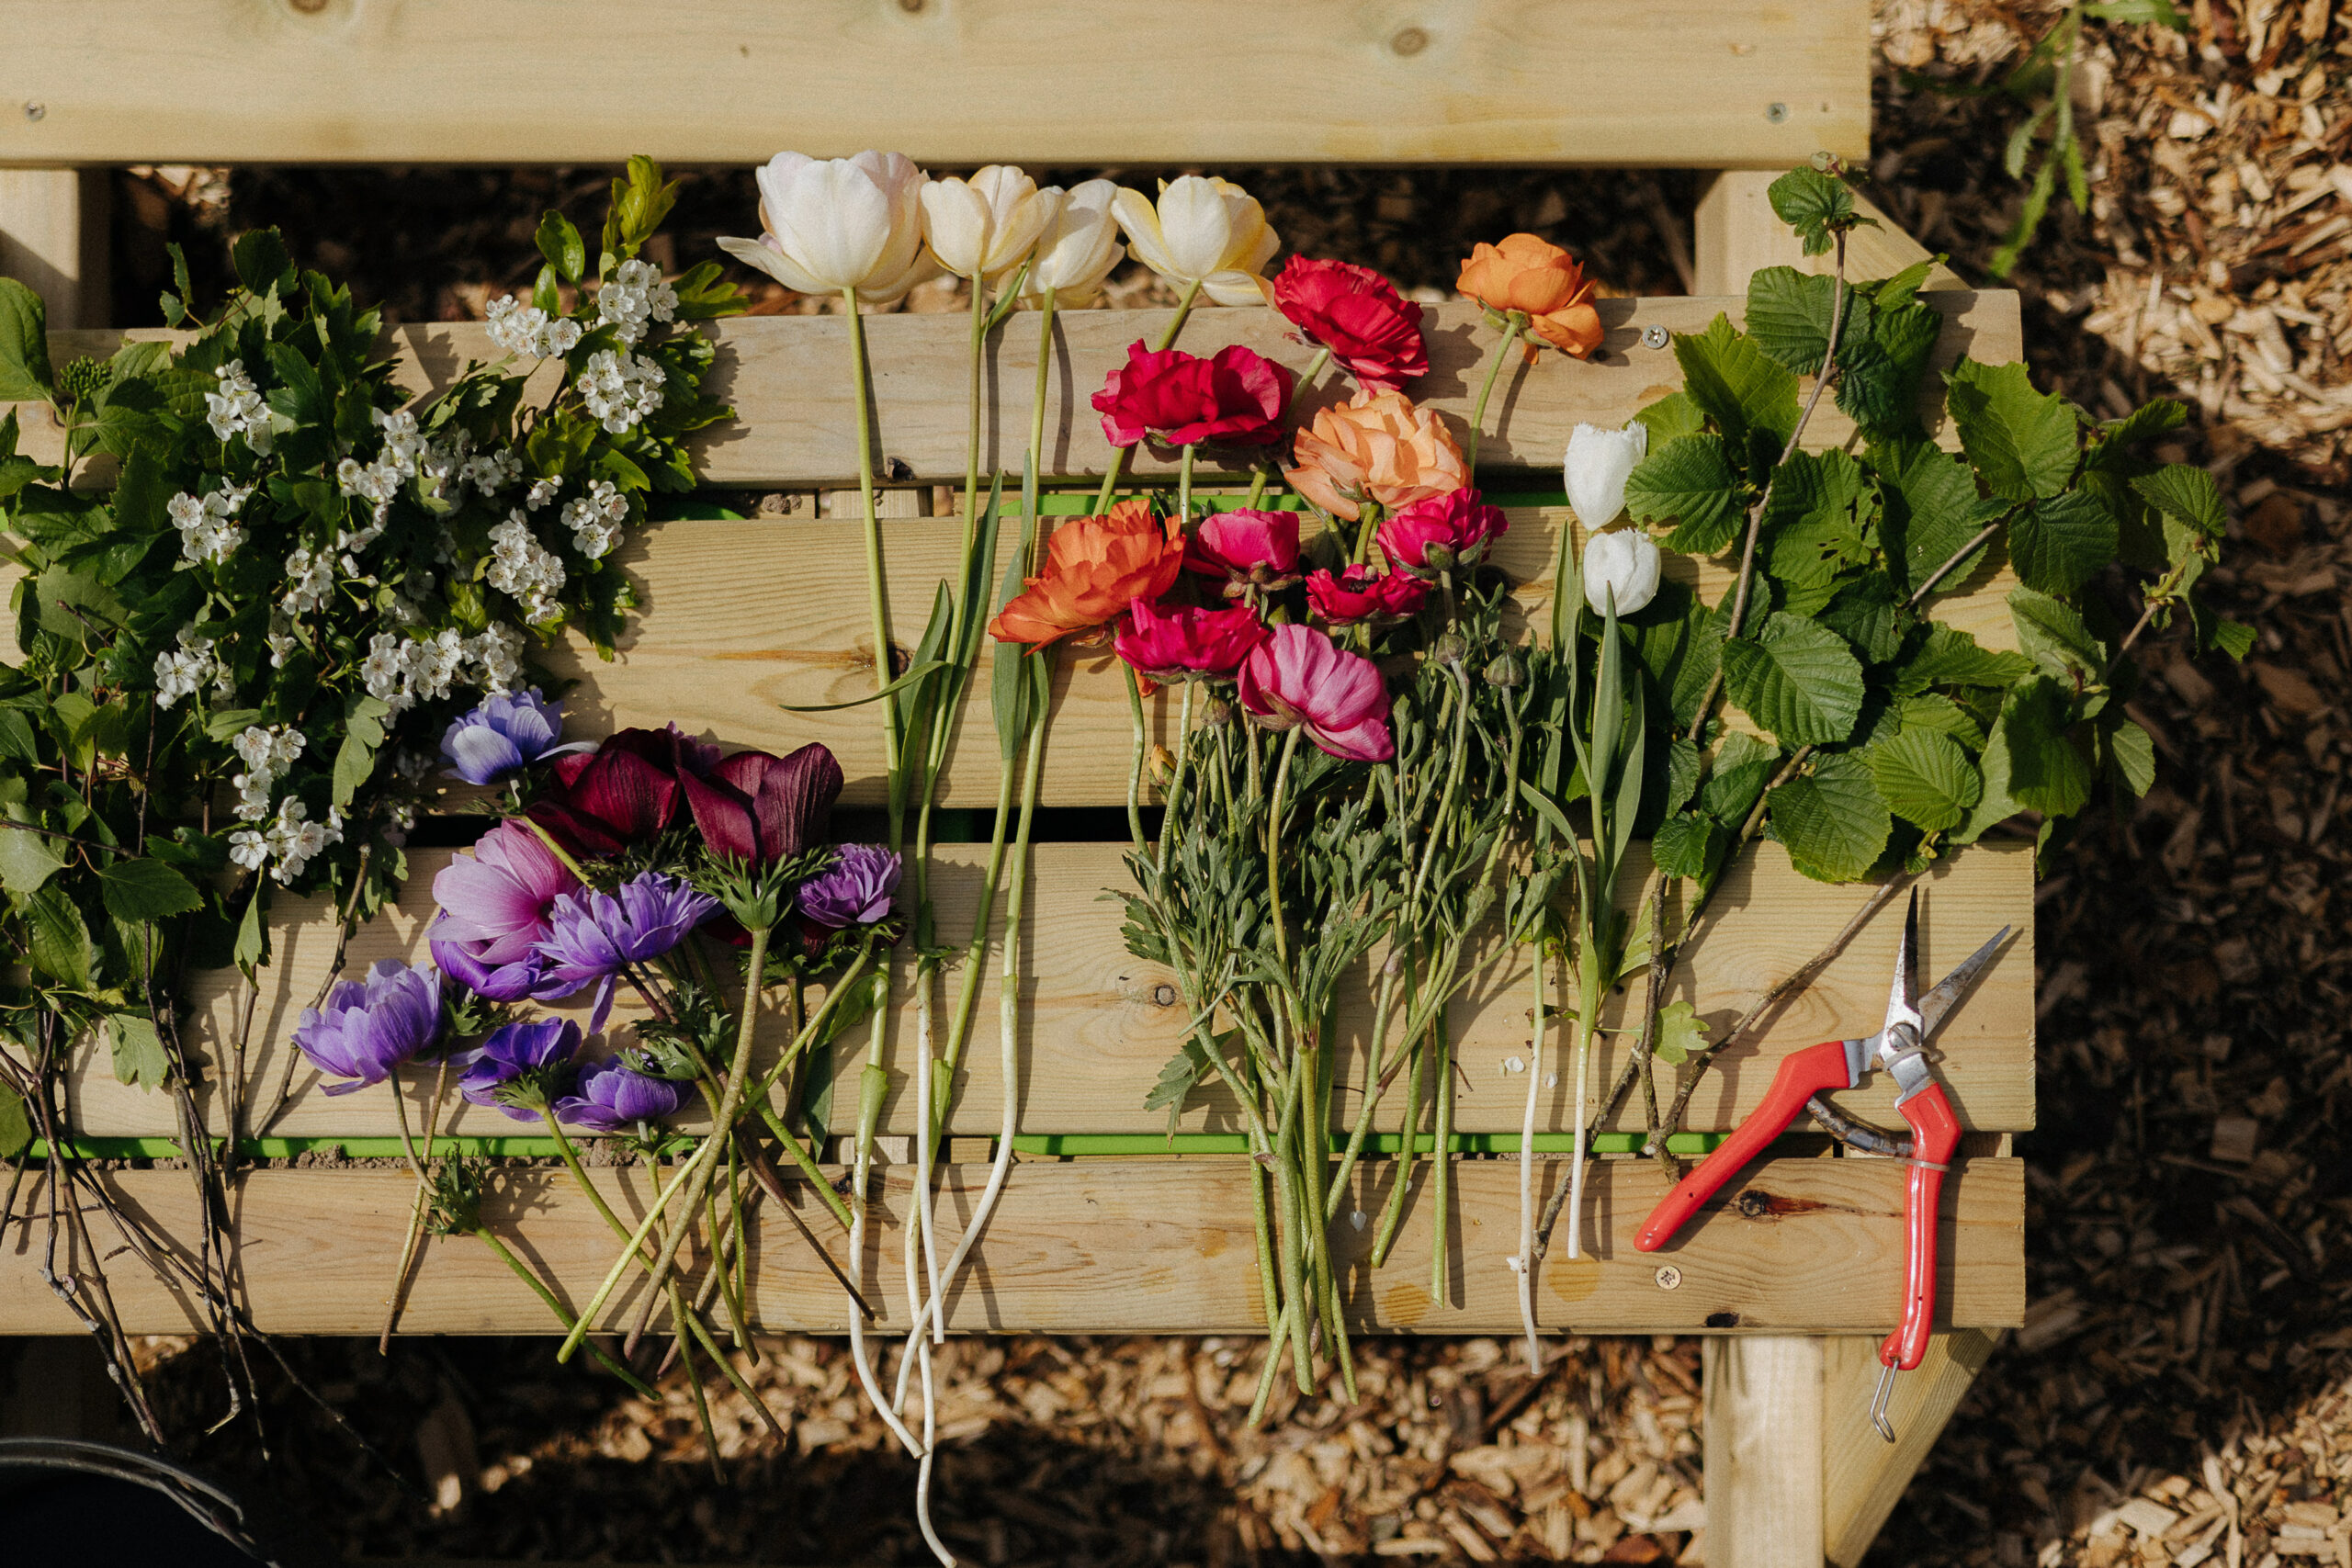 A colourful array of flowers laid out on a bench, waiting to be assembled into a bouquet